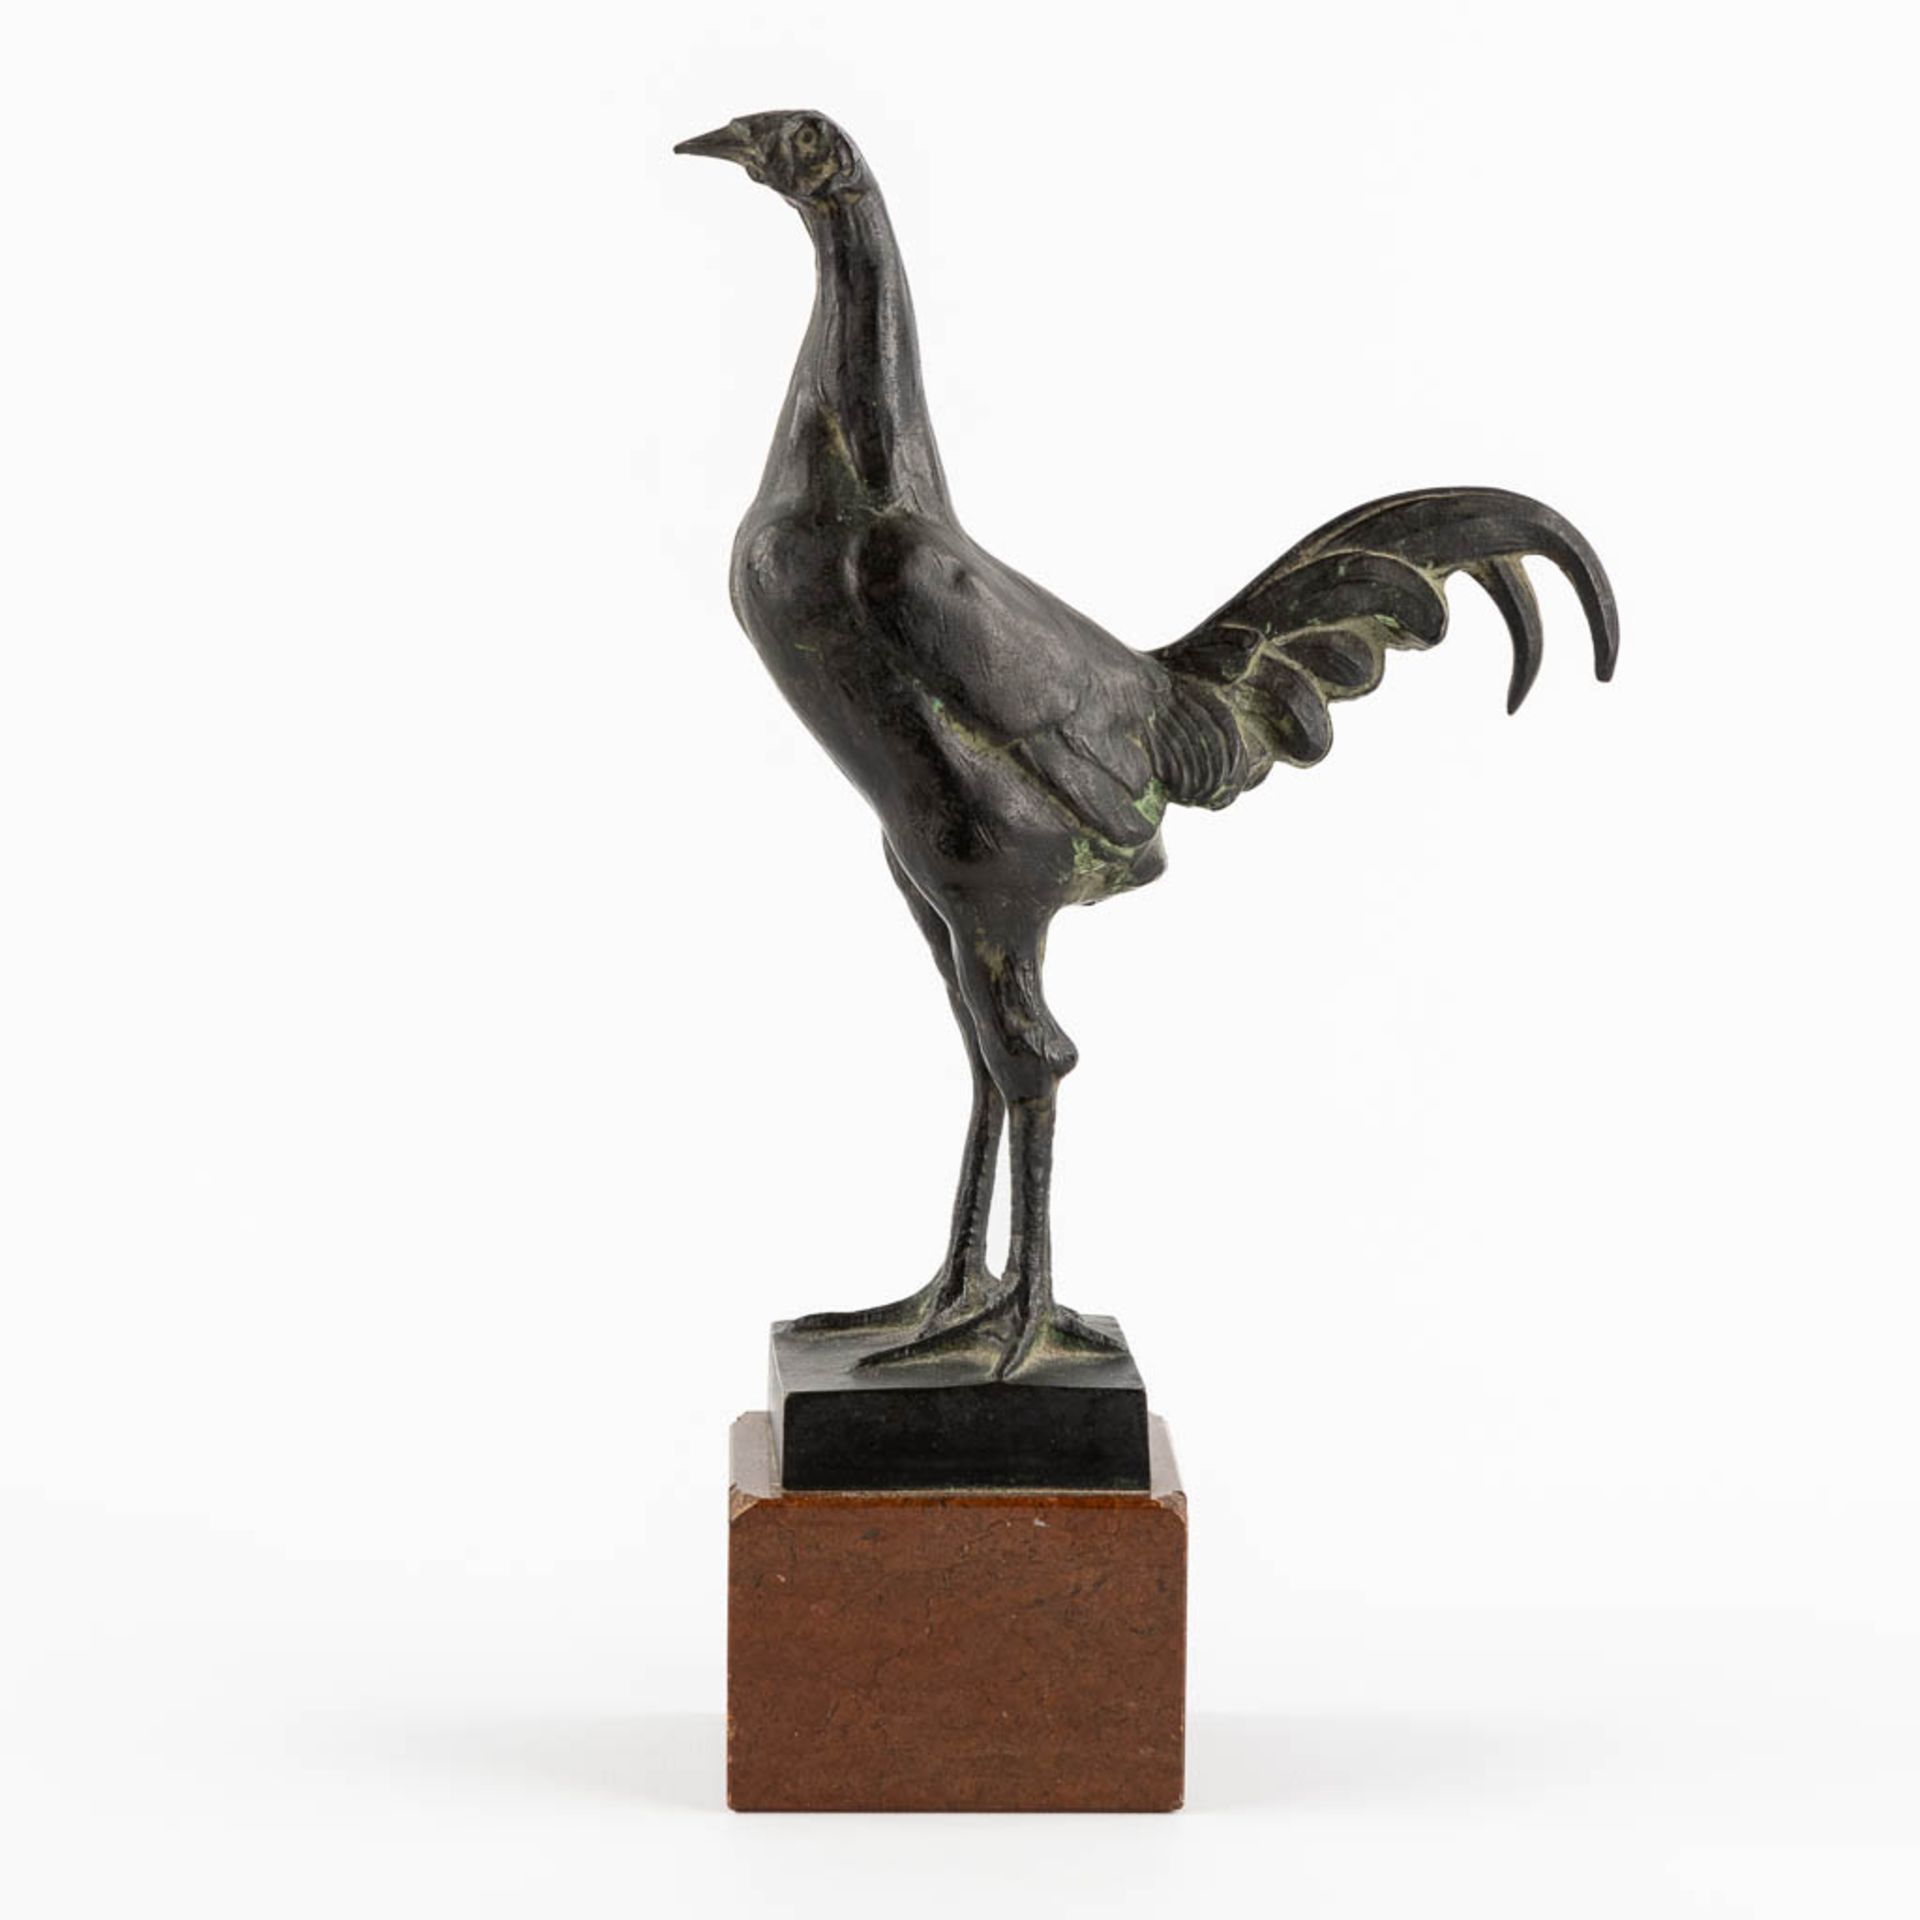 K. STACHOWSKY (XIX-XX) 'Rooster' patinated bronze on marble. (L:15 x W:7 x H:26 cm) - Image 4 of 11